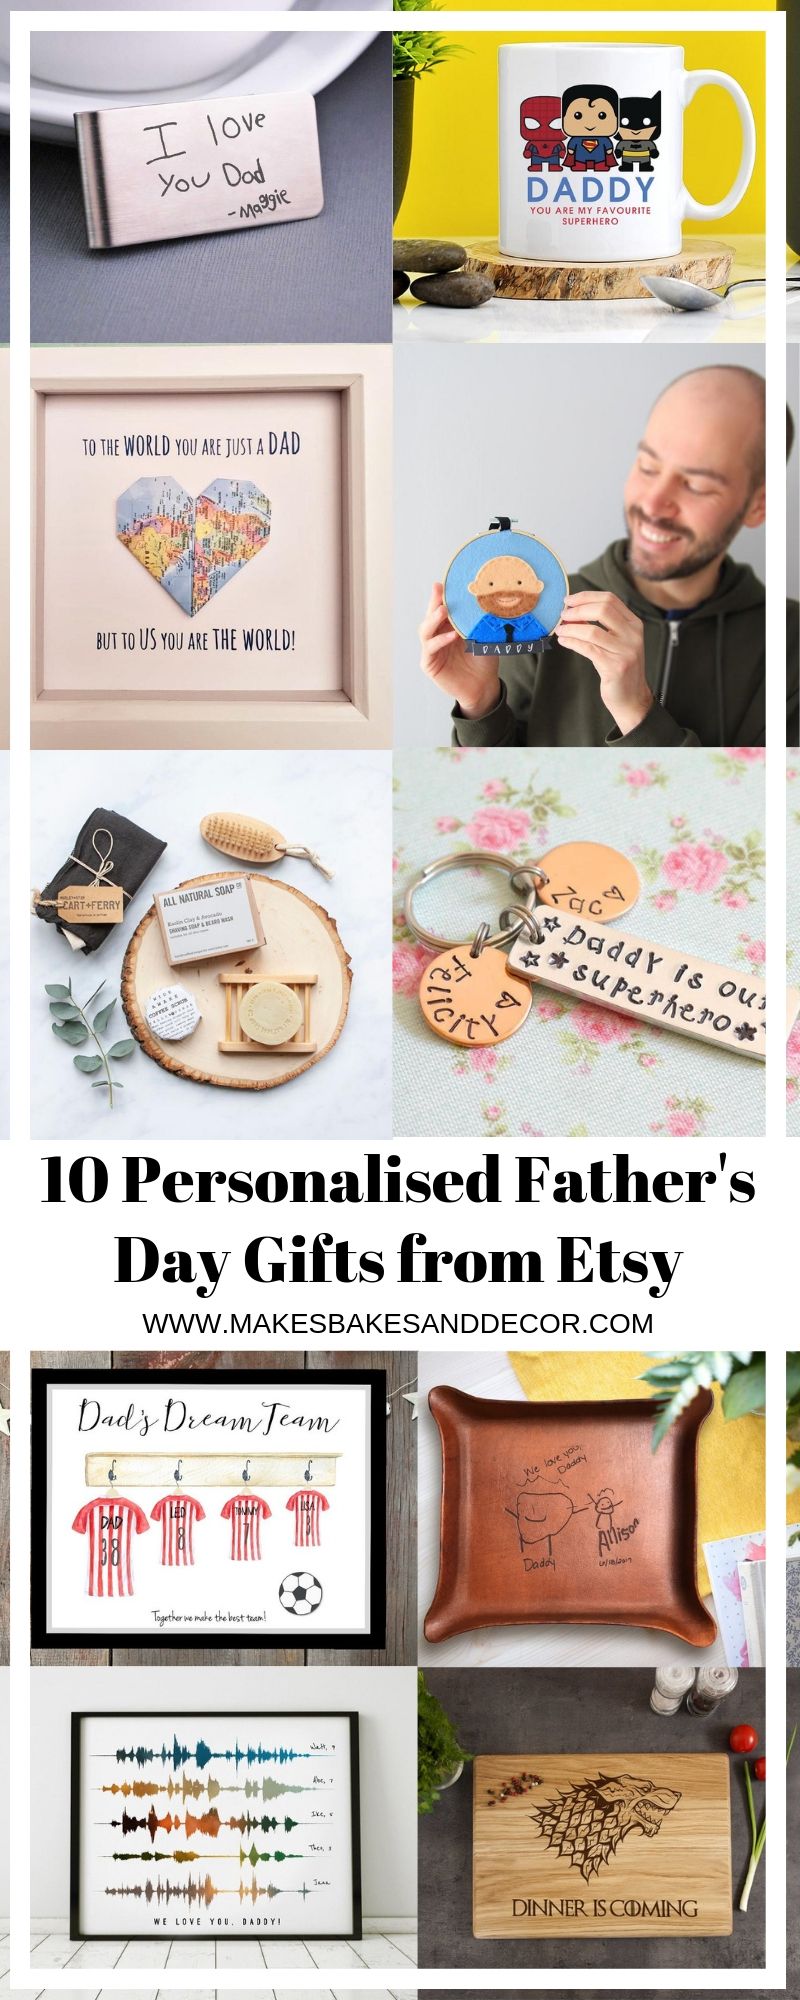 my top 10 father's day gifts on Etsy